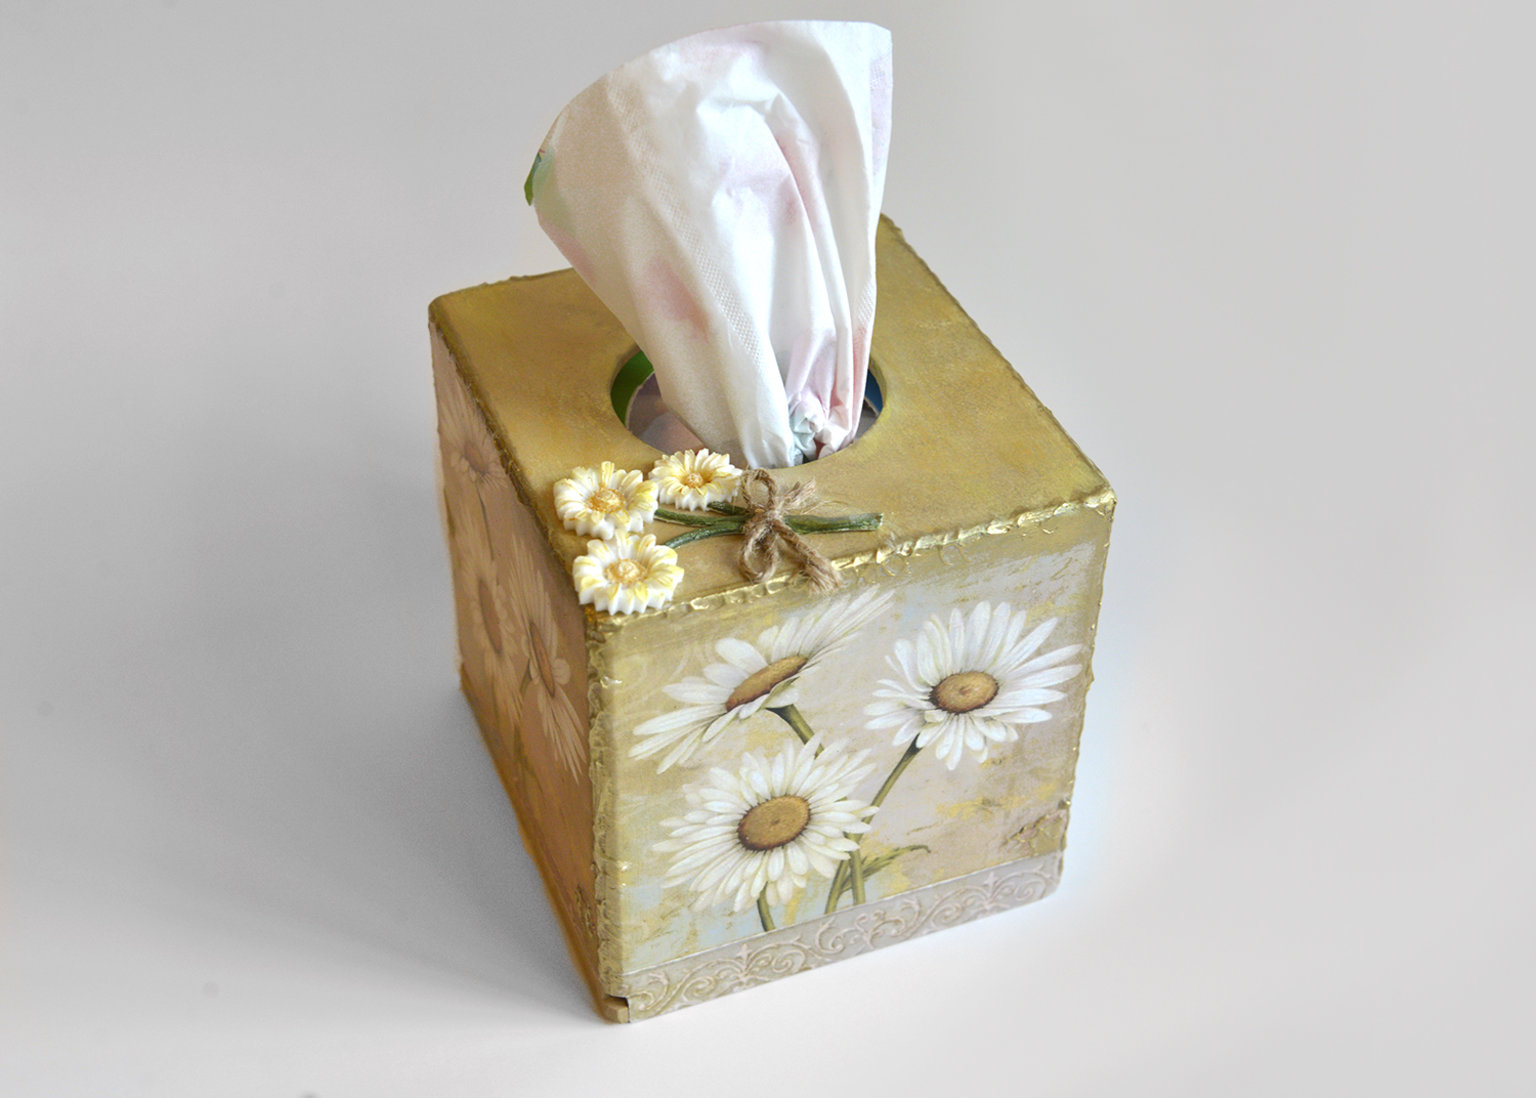 Tissue box with daisies